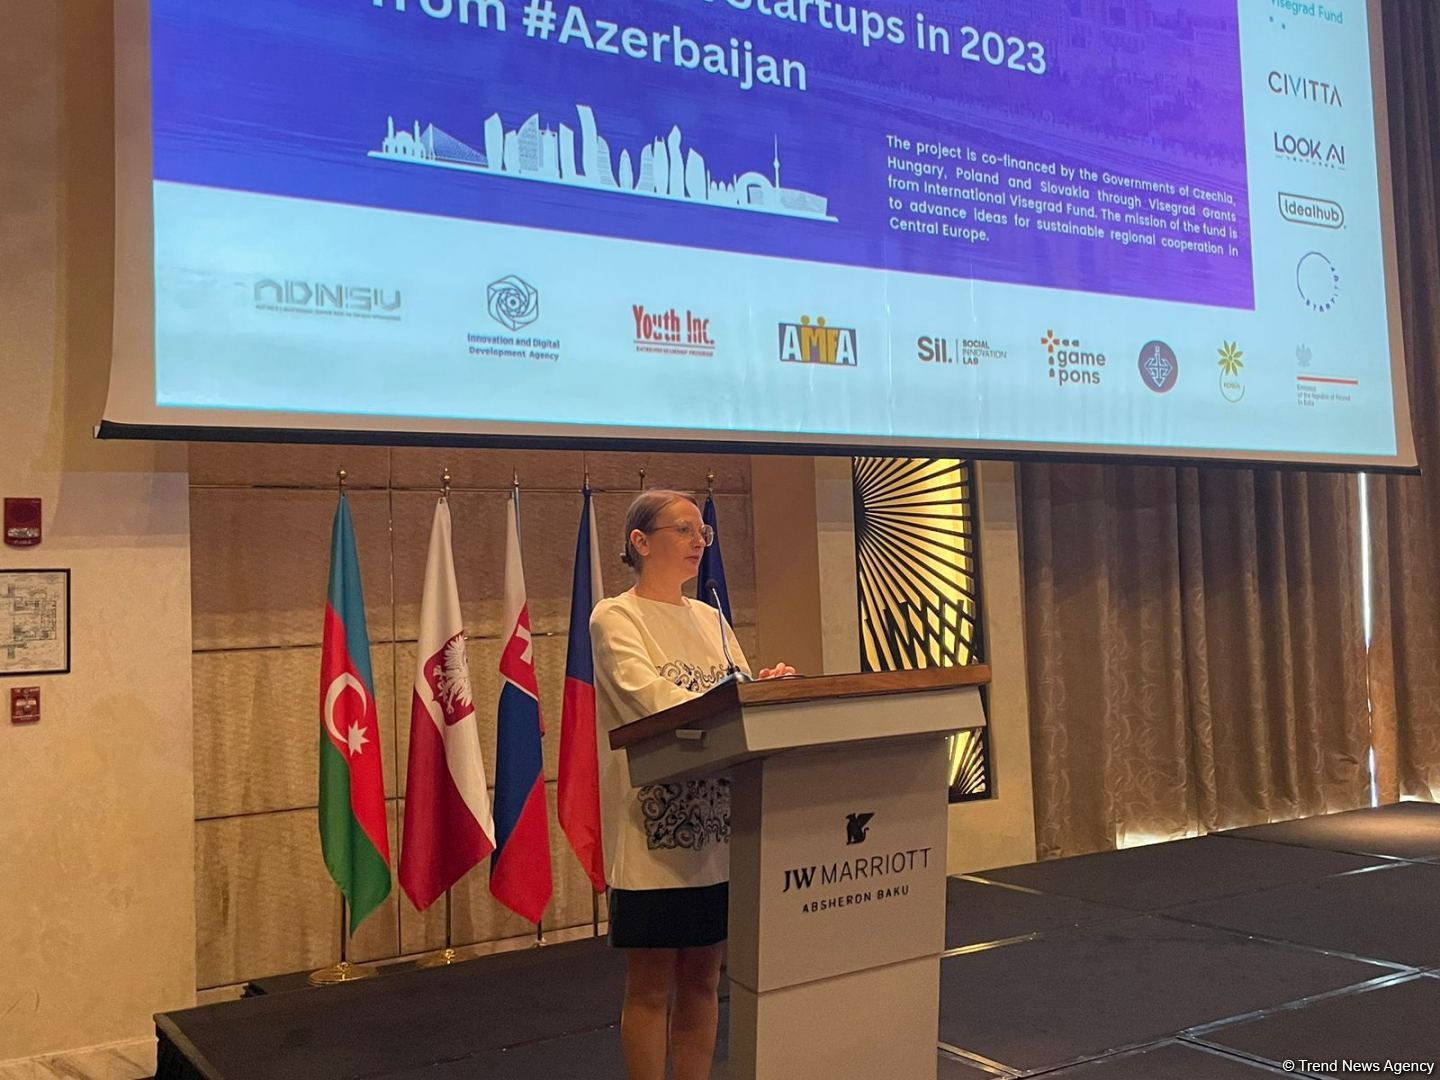 Number of start-ups supported through V4ATB project in Azerbaijan revealed